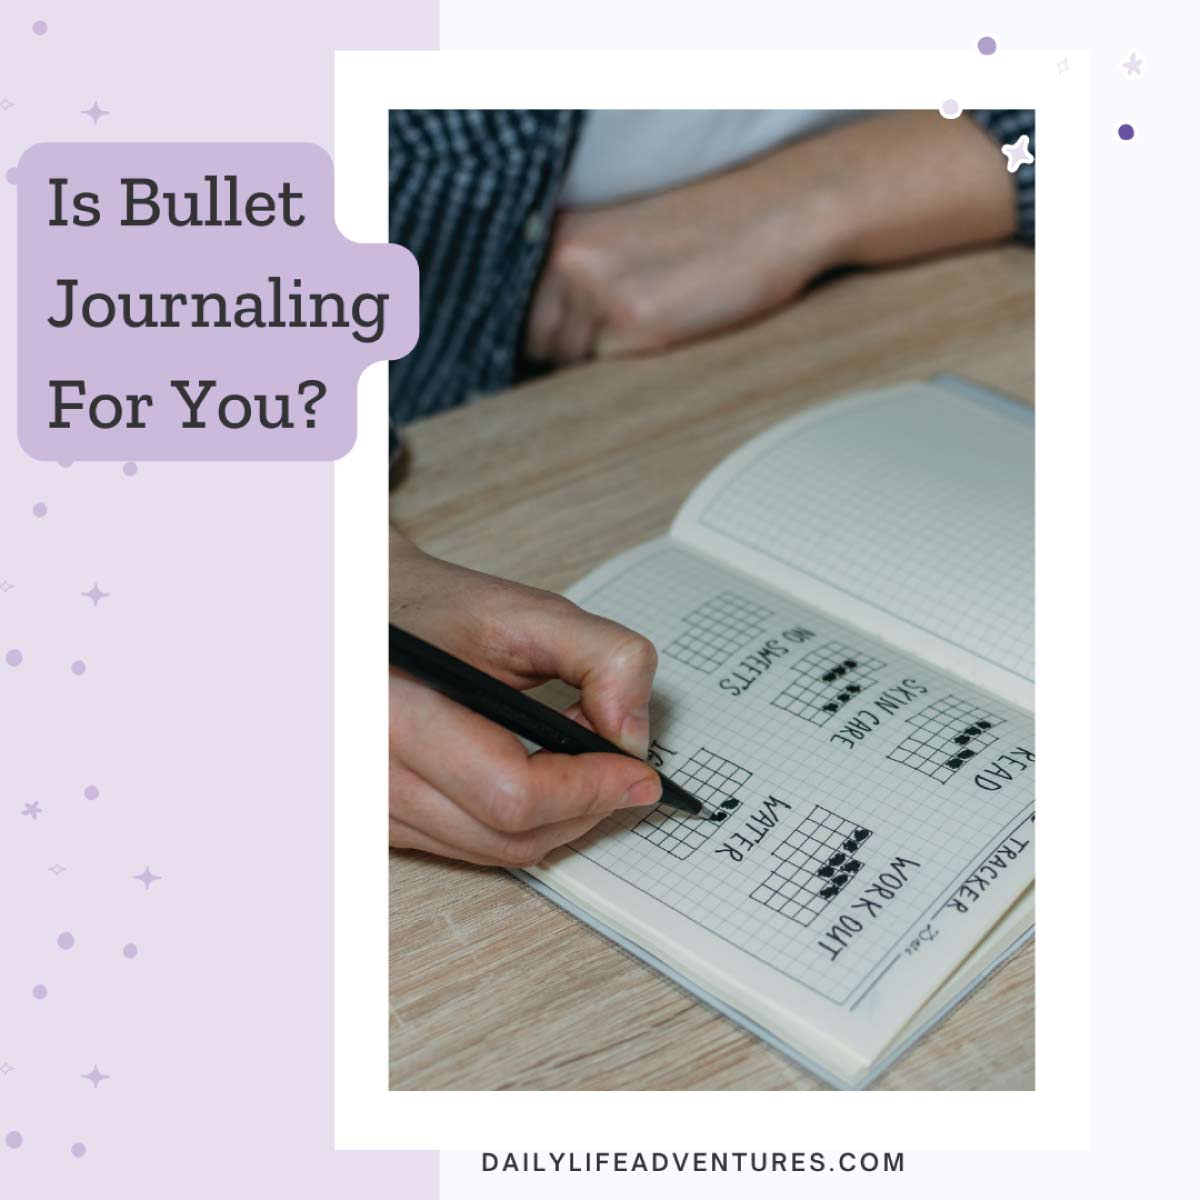 Who Can Benefit from Bullet Journaling?